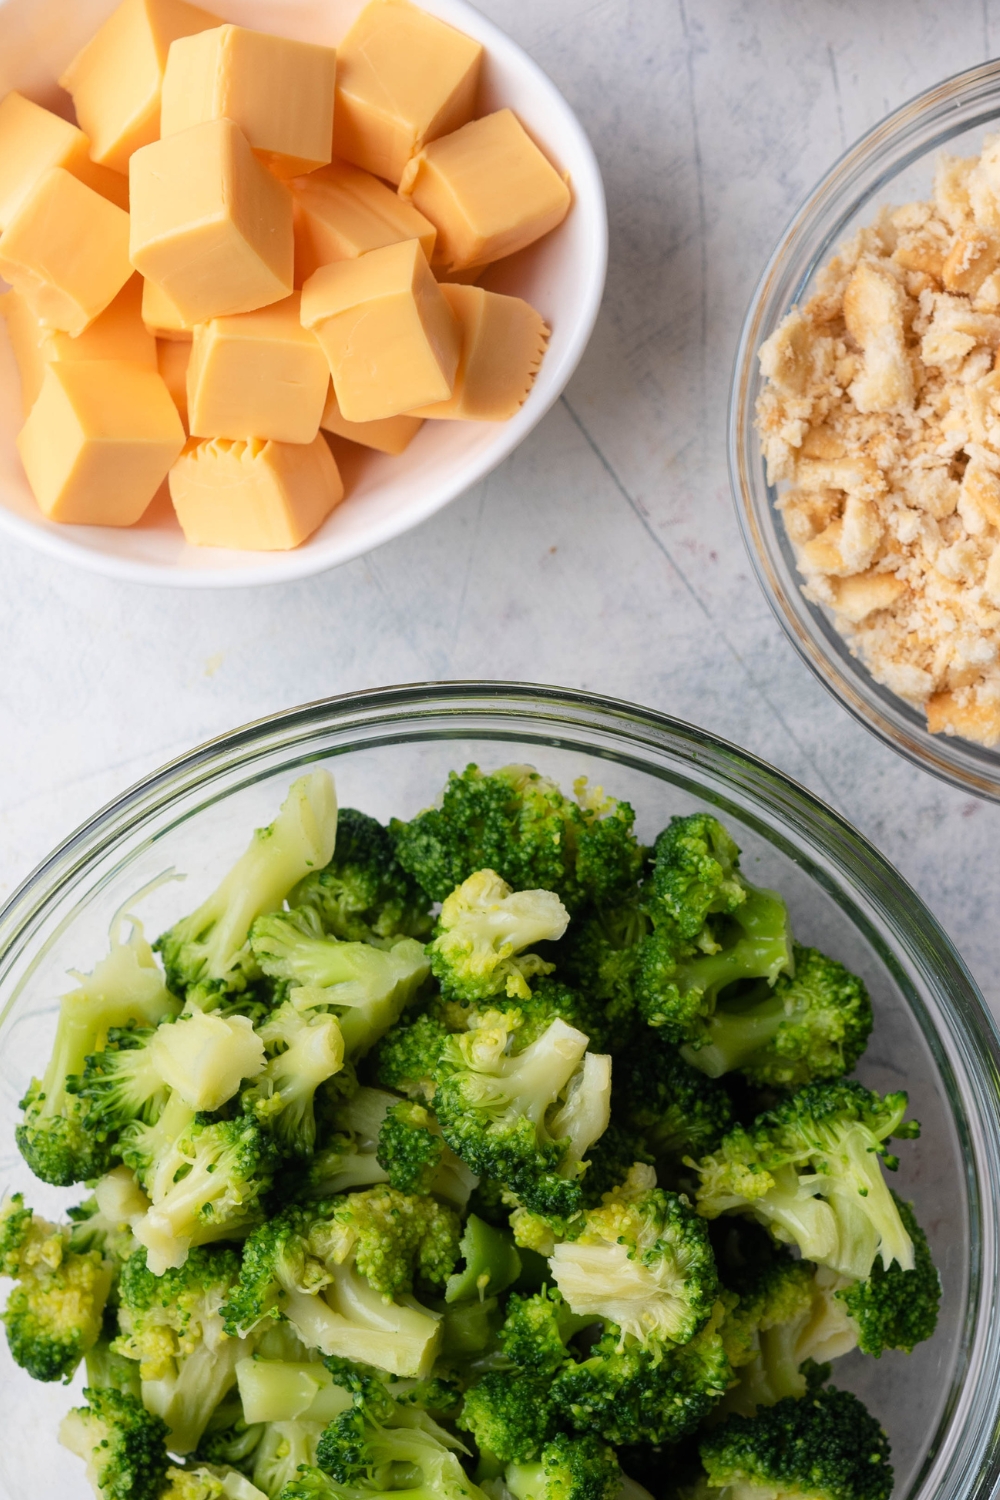 A close-up of three bowls containing broccoli, crumbled crackers, cubed cheese.